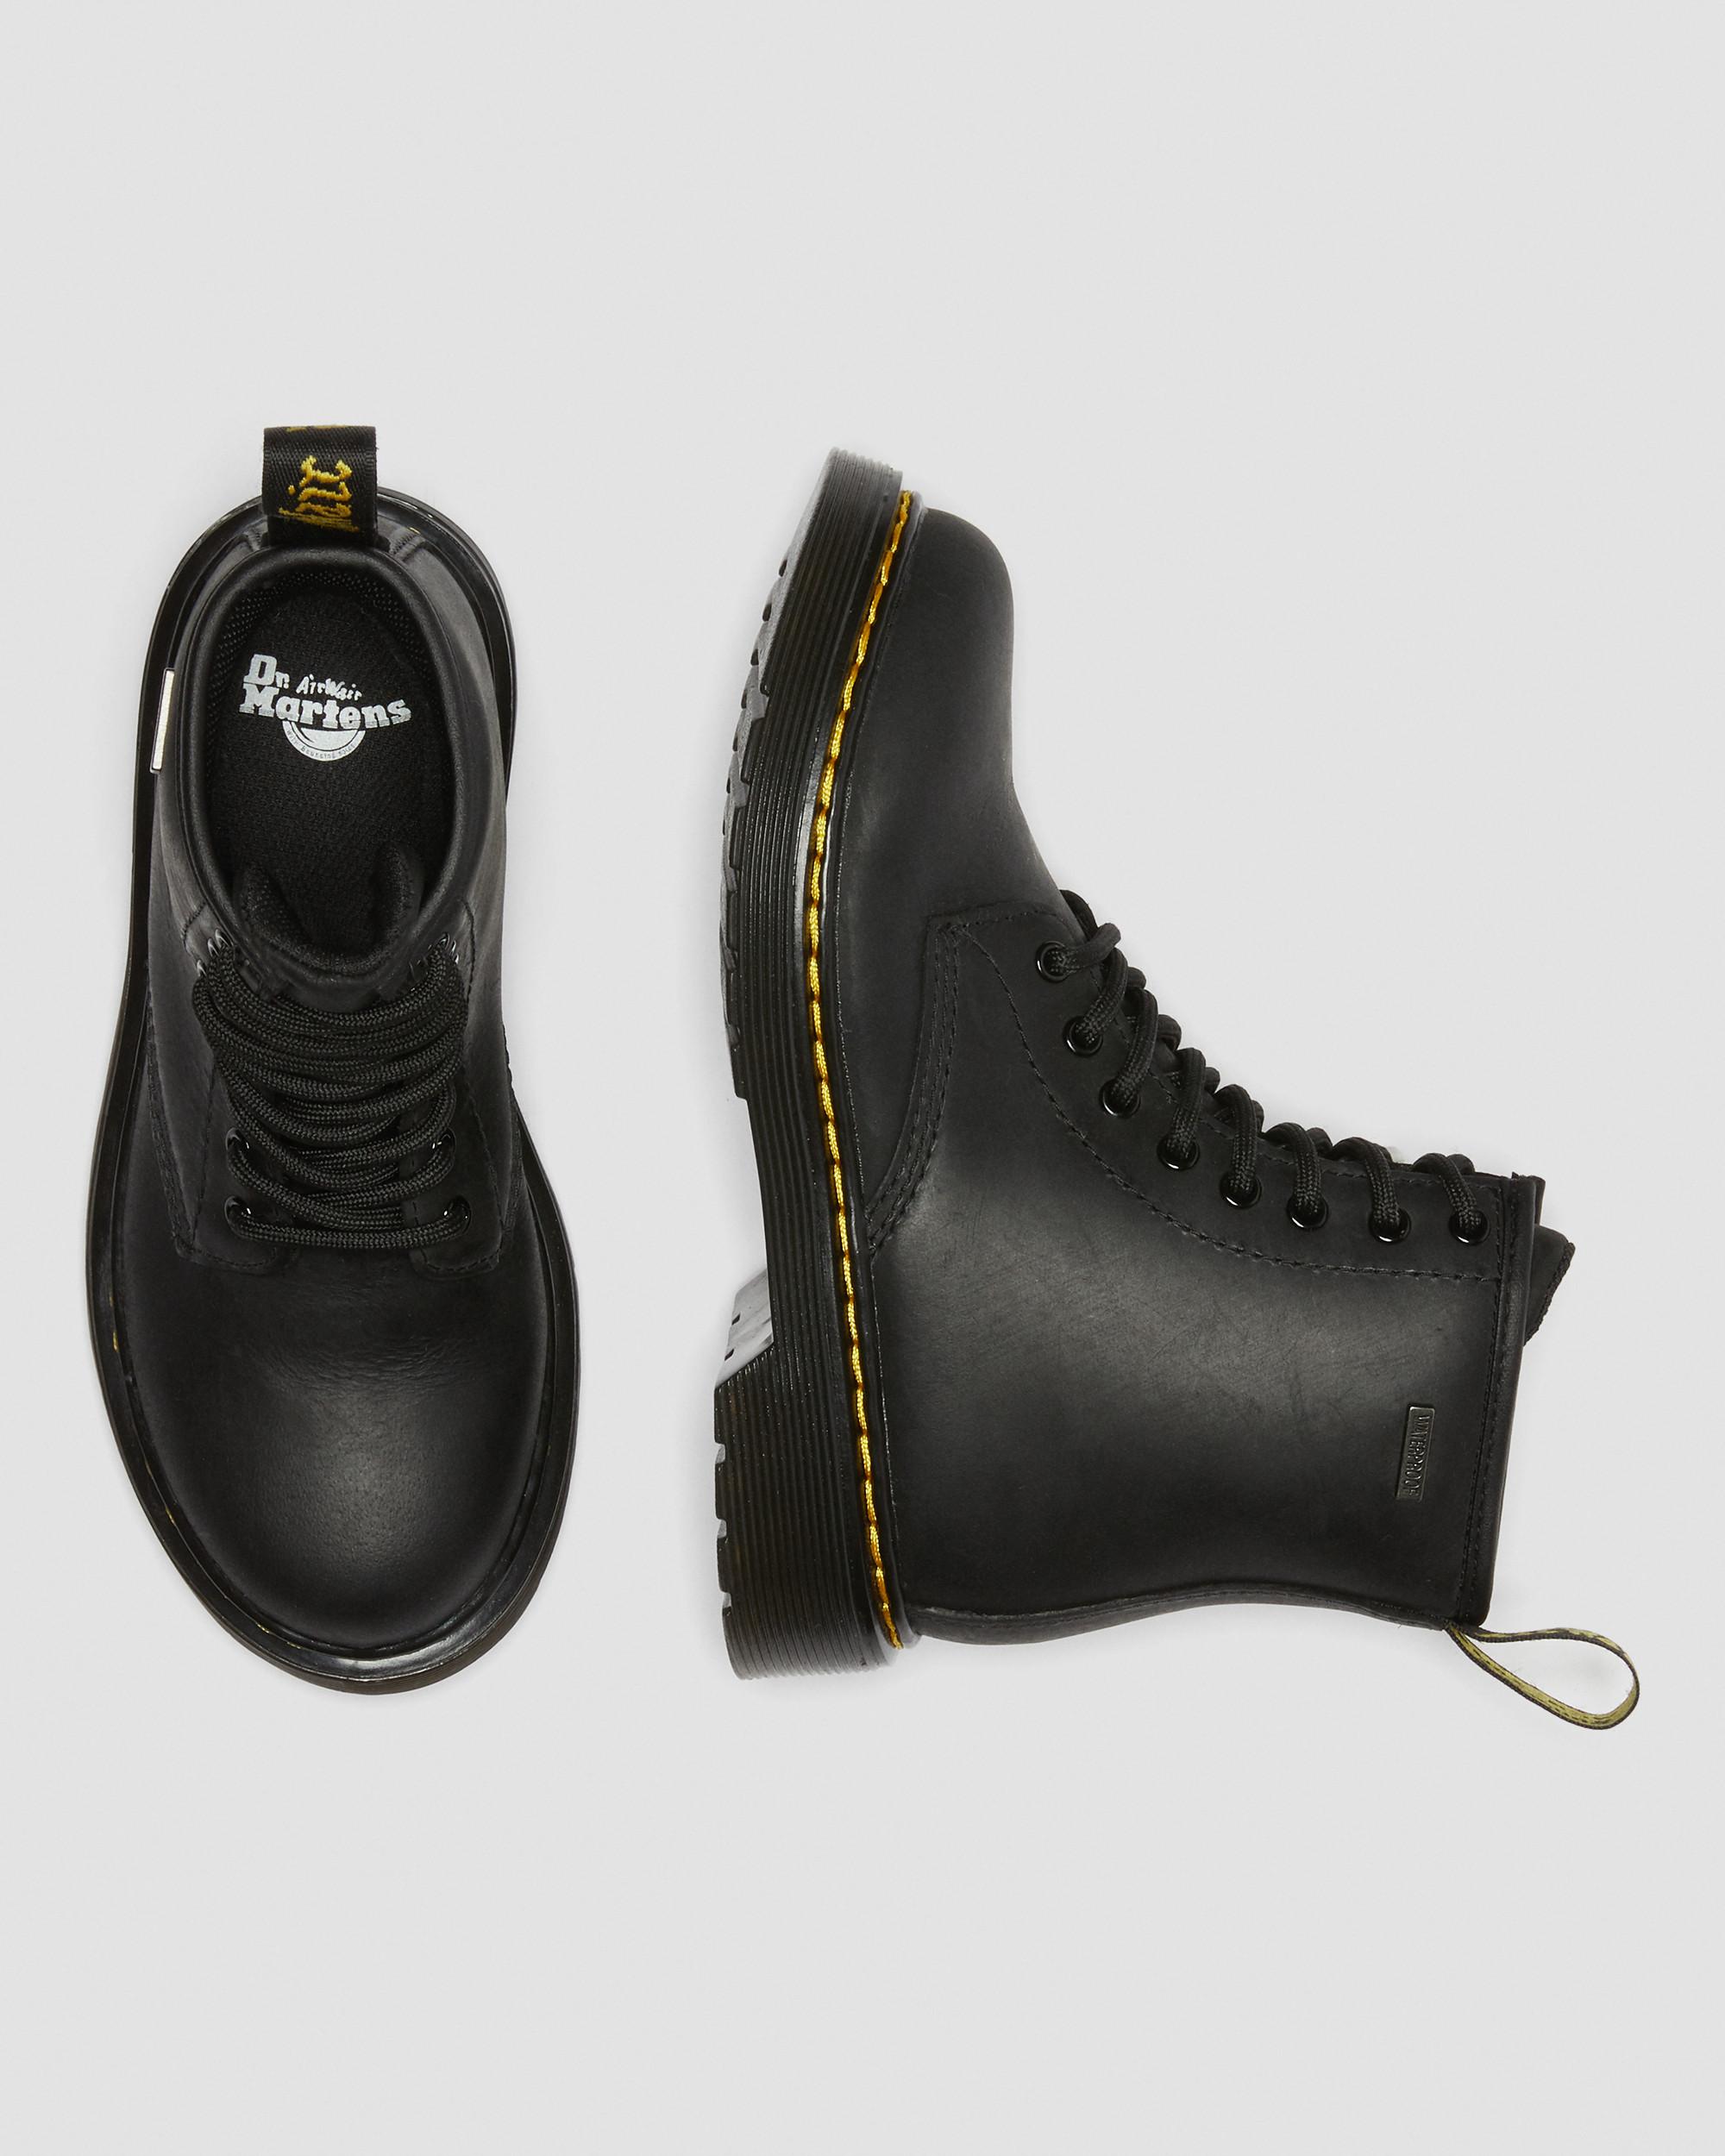 JUNIOR 1460 WATERPROOF LEATHER ANKLE BOOTS in Black | Dr. Martens